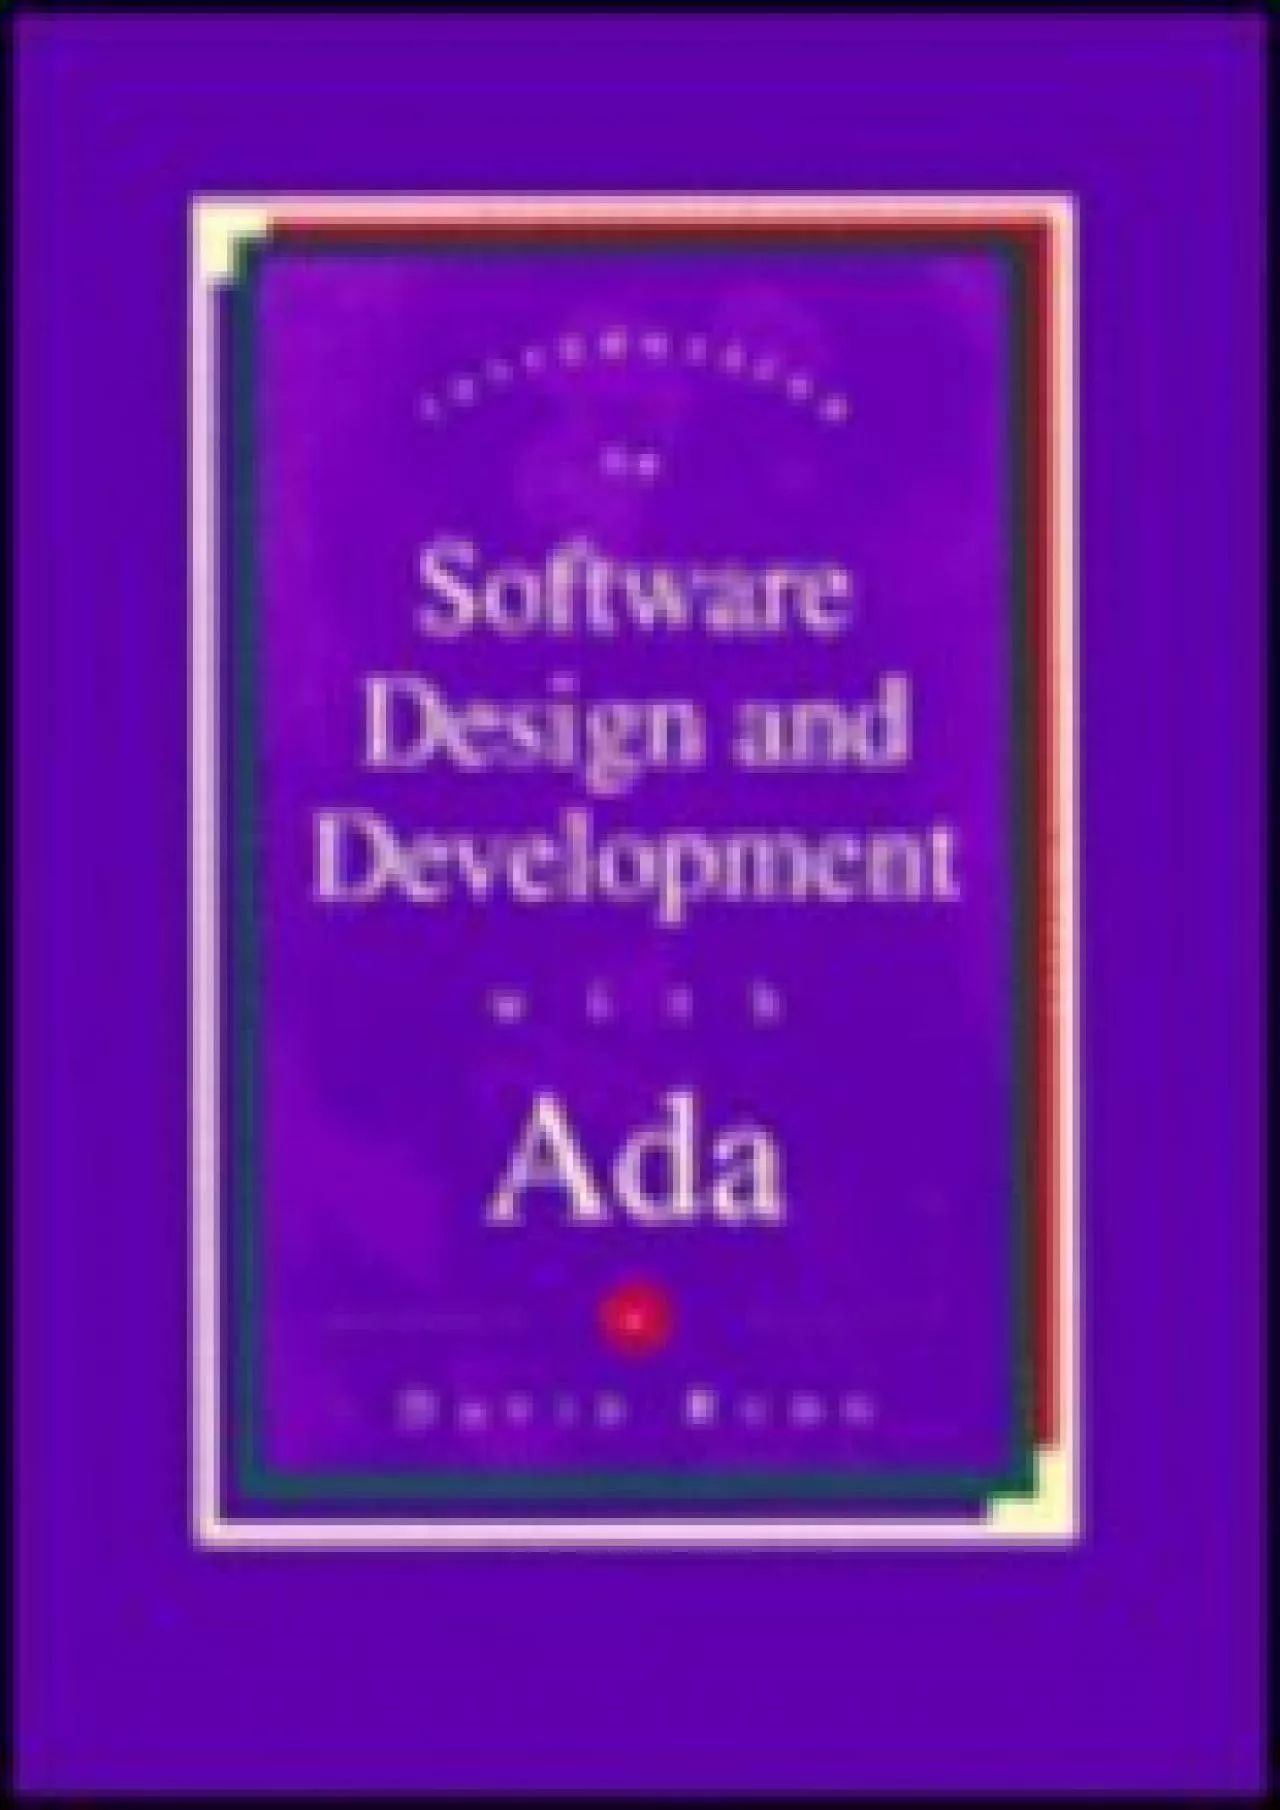 [BEST]-Introduction to Software Design and Development With Ada